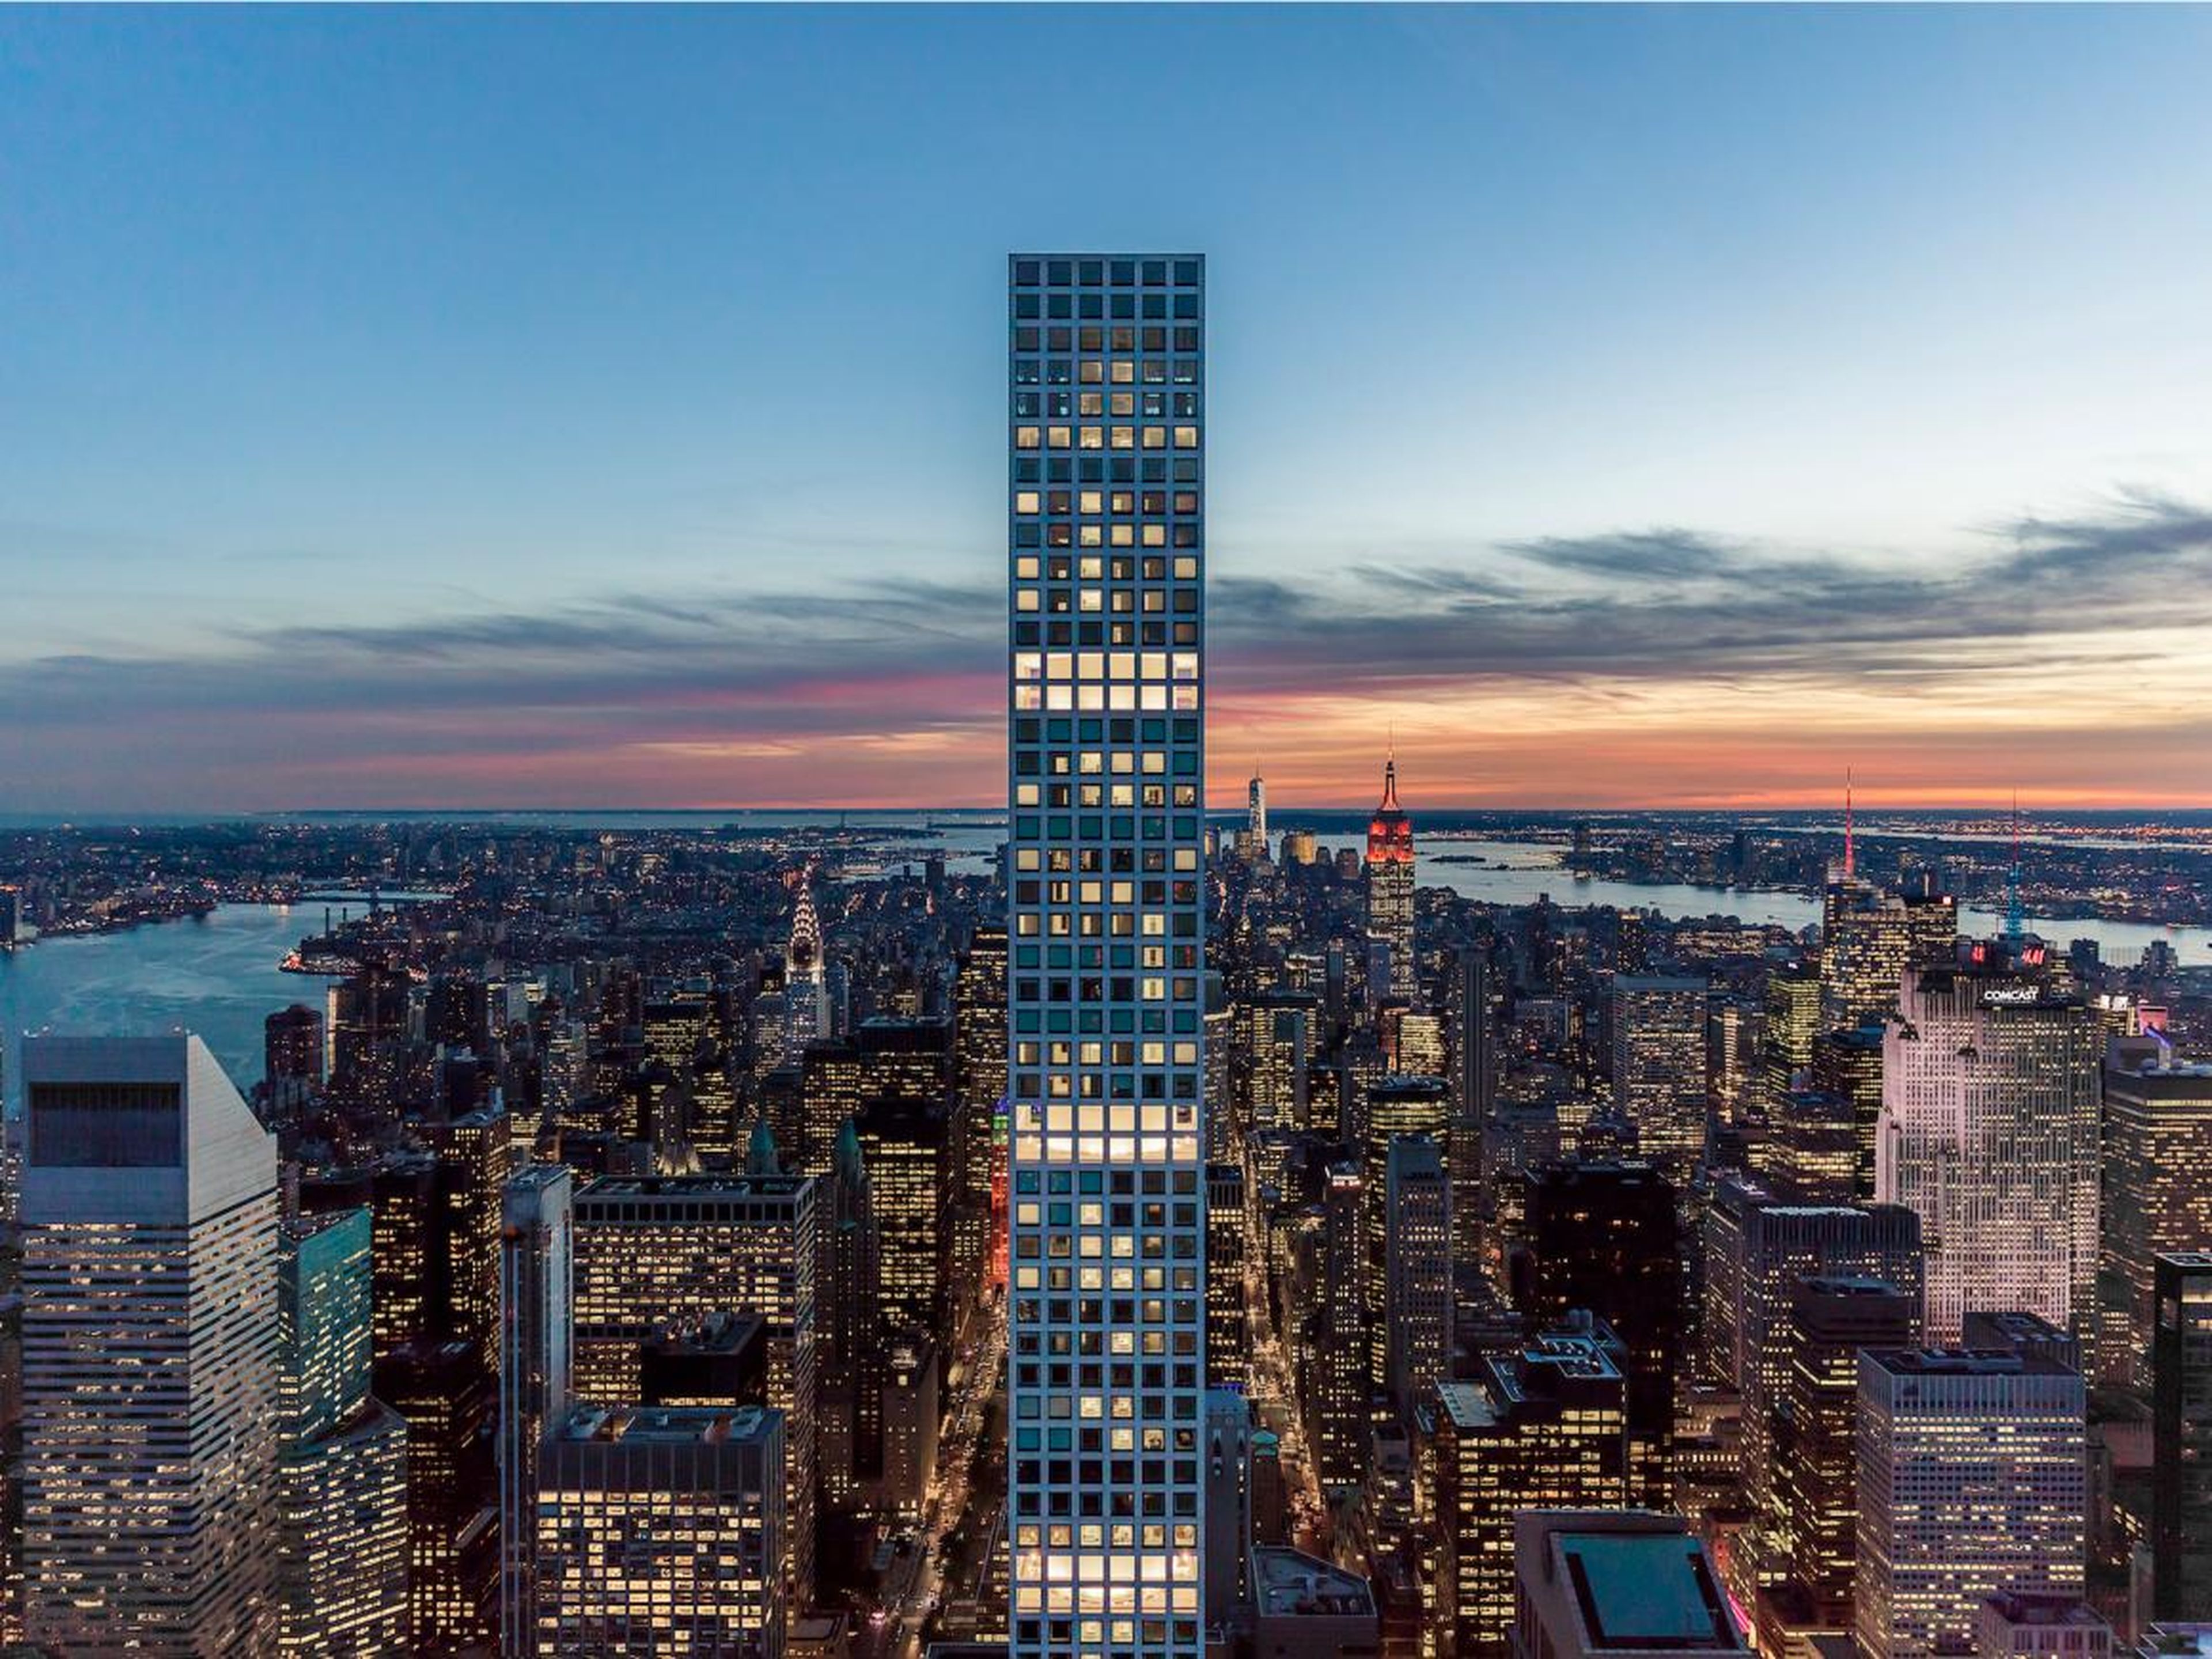 Floors 91 through 96 are referred to as penthouses because their layouts are different from the rest of the building and some are full floors, a representative for the developer told Business Insider.